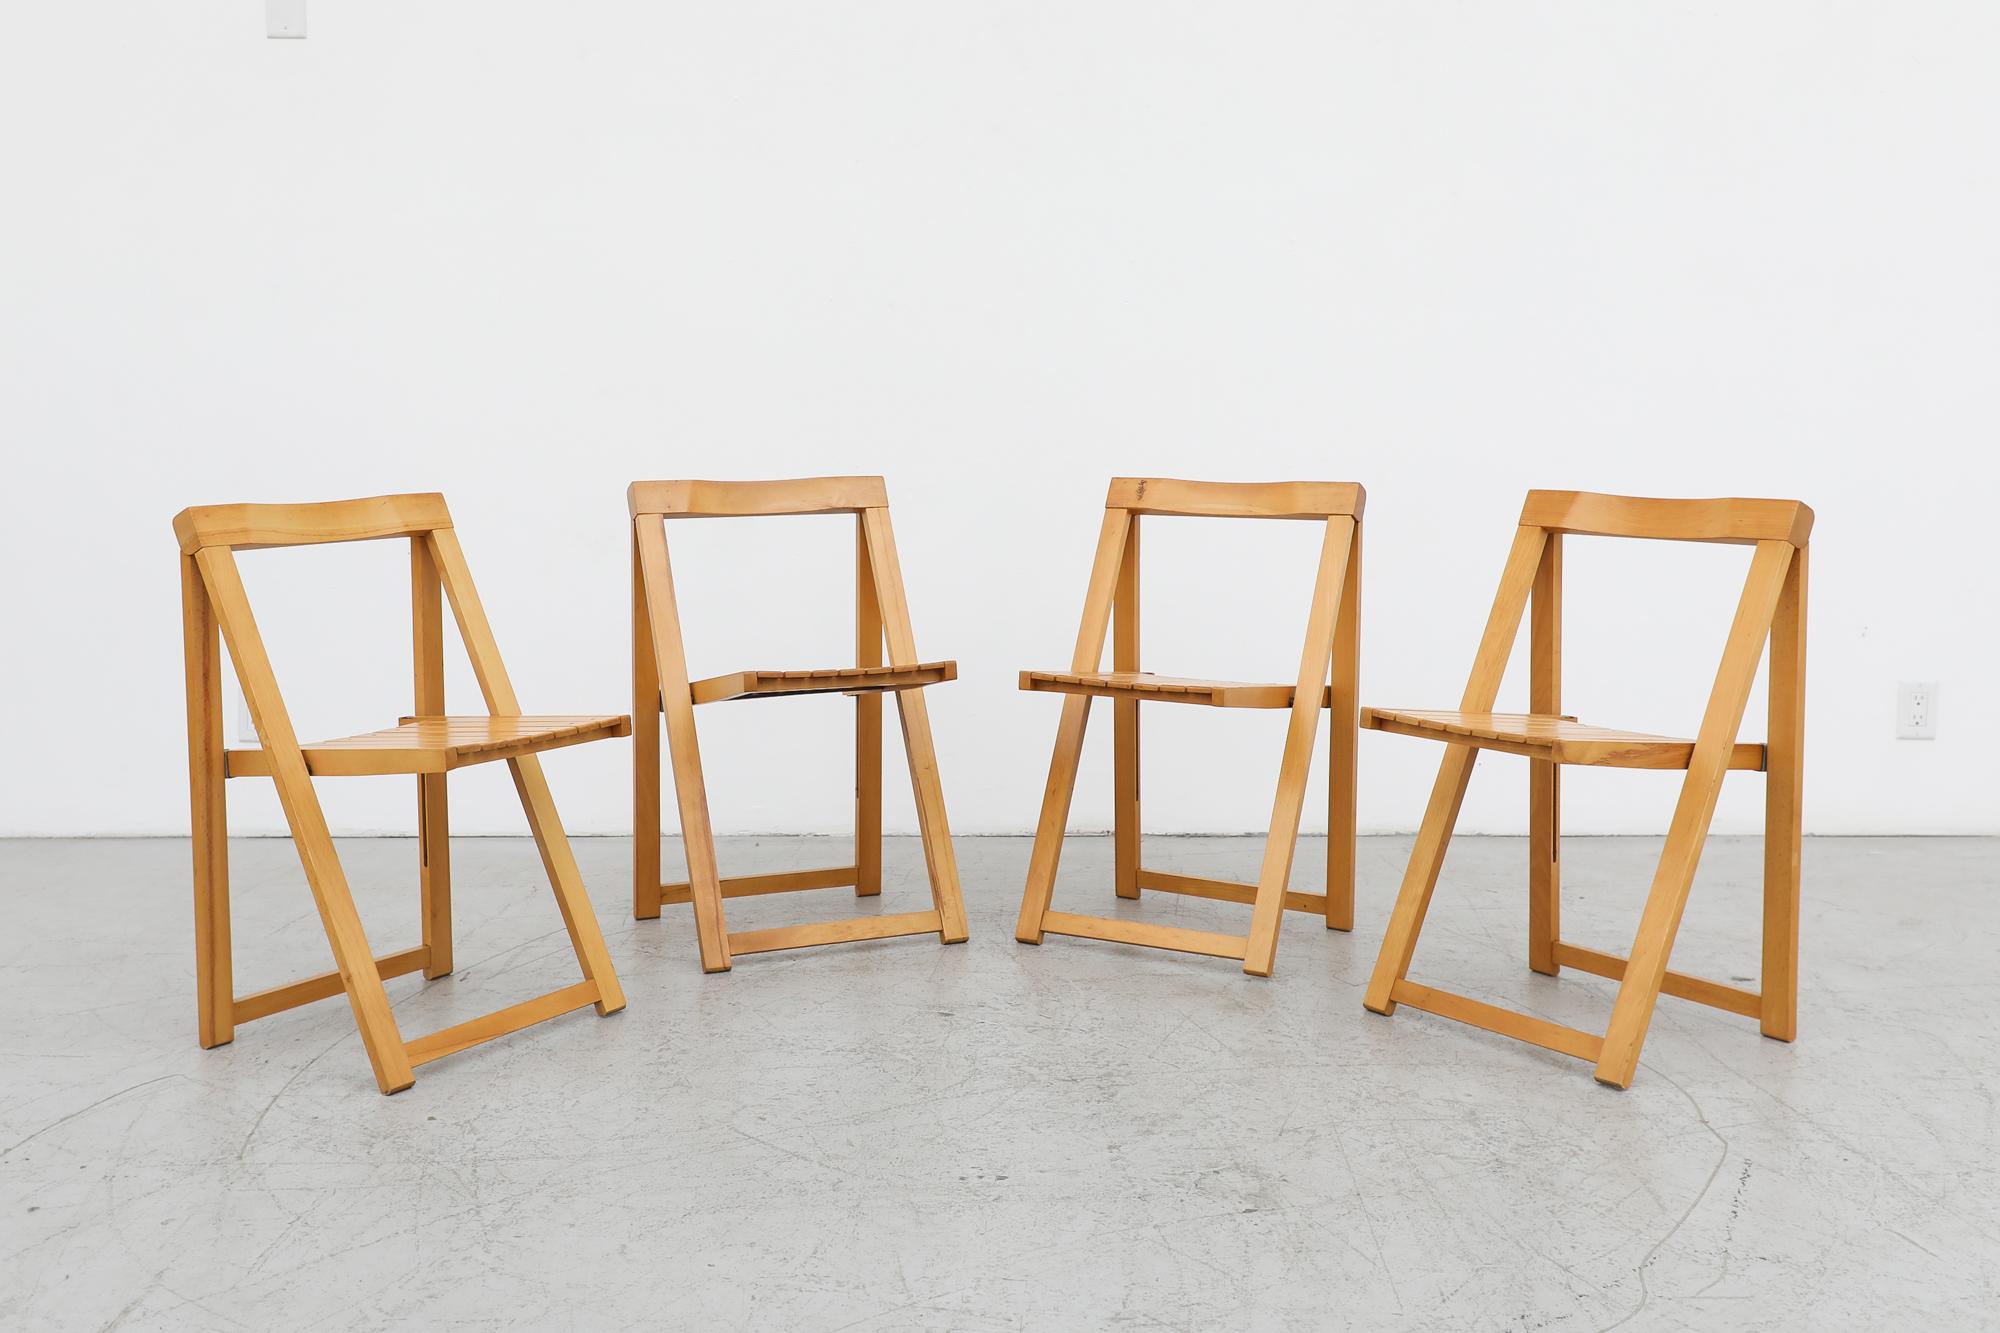 Set of 4 Aldo Jacober folding chairs for for Alberto Bazzani, 1960. Light Beech wood folding chais with space saving functionality and mid-century style. Folded they measure 18 x 1.625 x 34.875. In original condition with visible wear and chipping